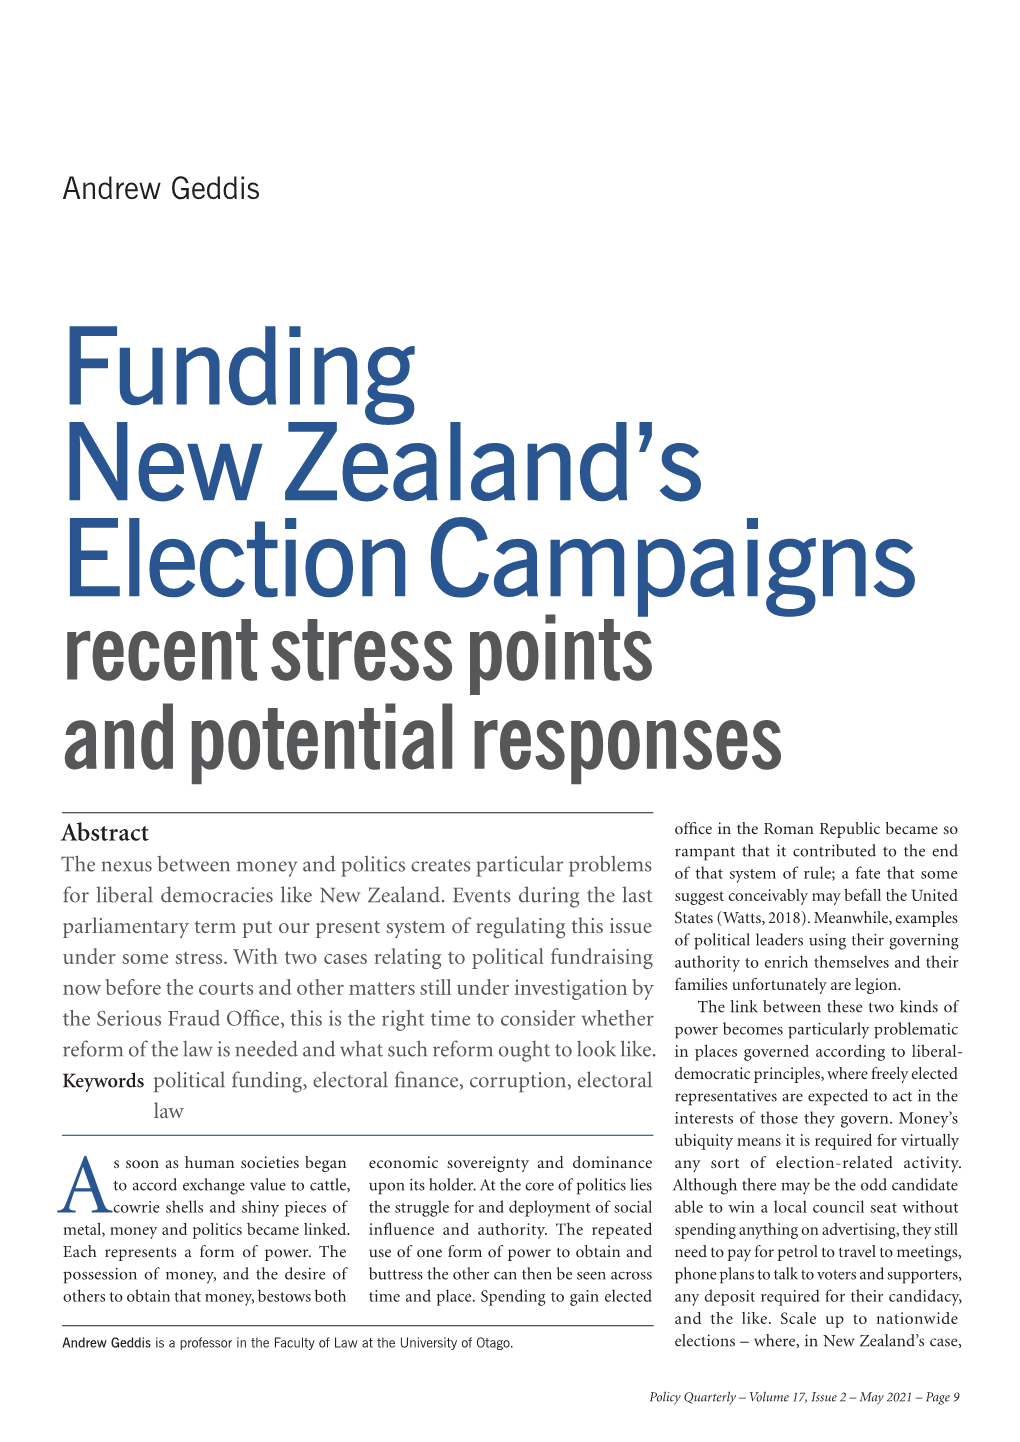 Funding New Zealand's Election Campaigns